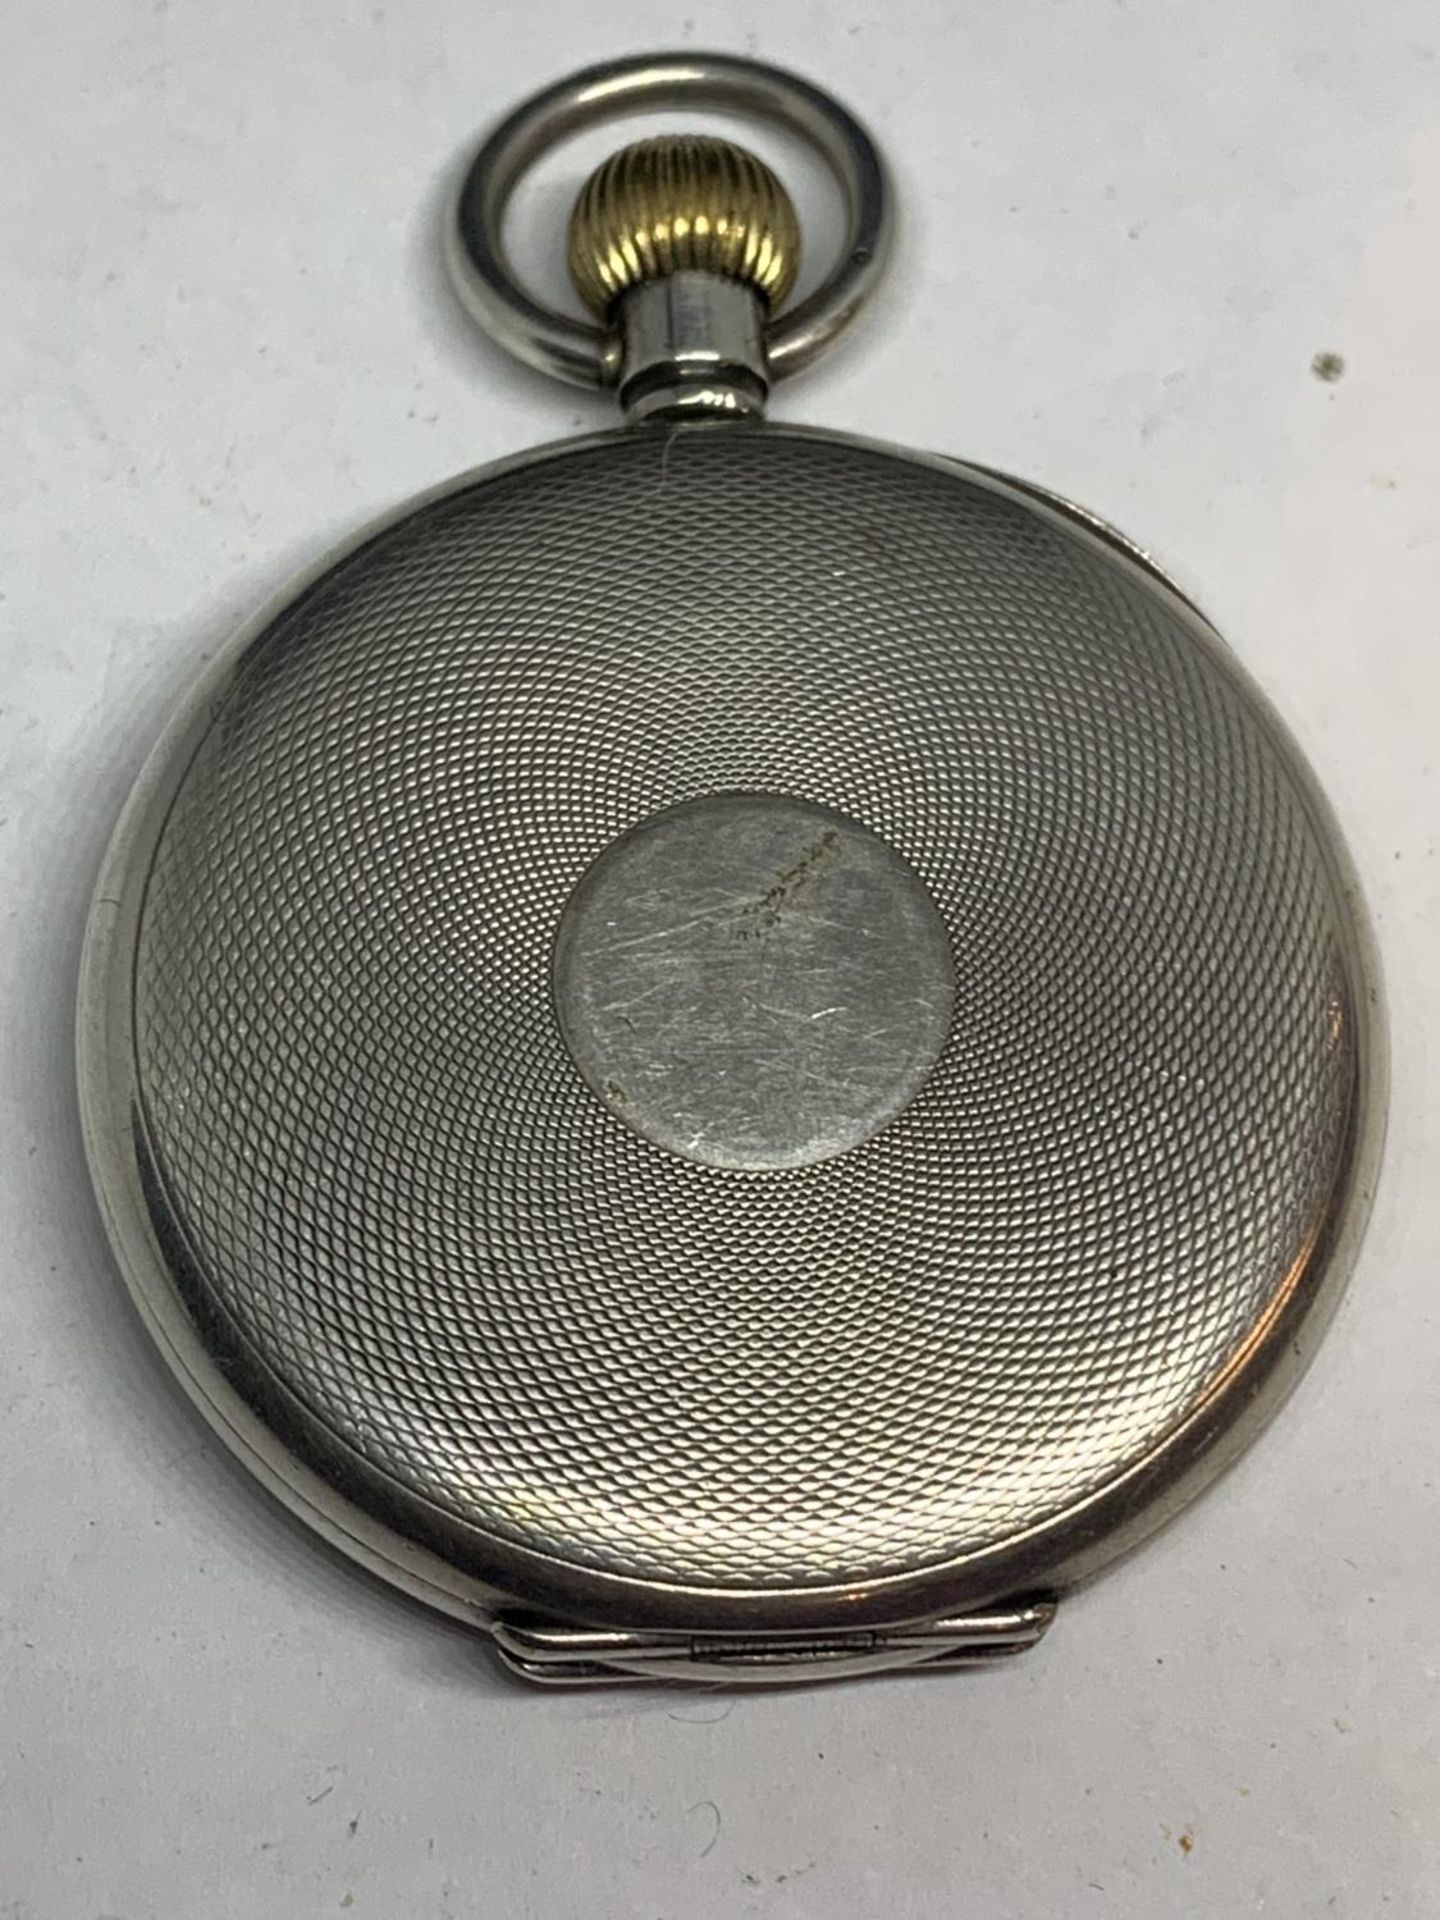 A MAKED 925 SILVER ALBION POCKET WATCH - Image 3 of 4